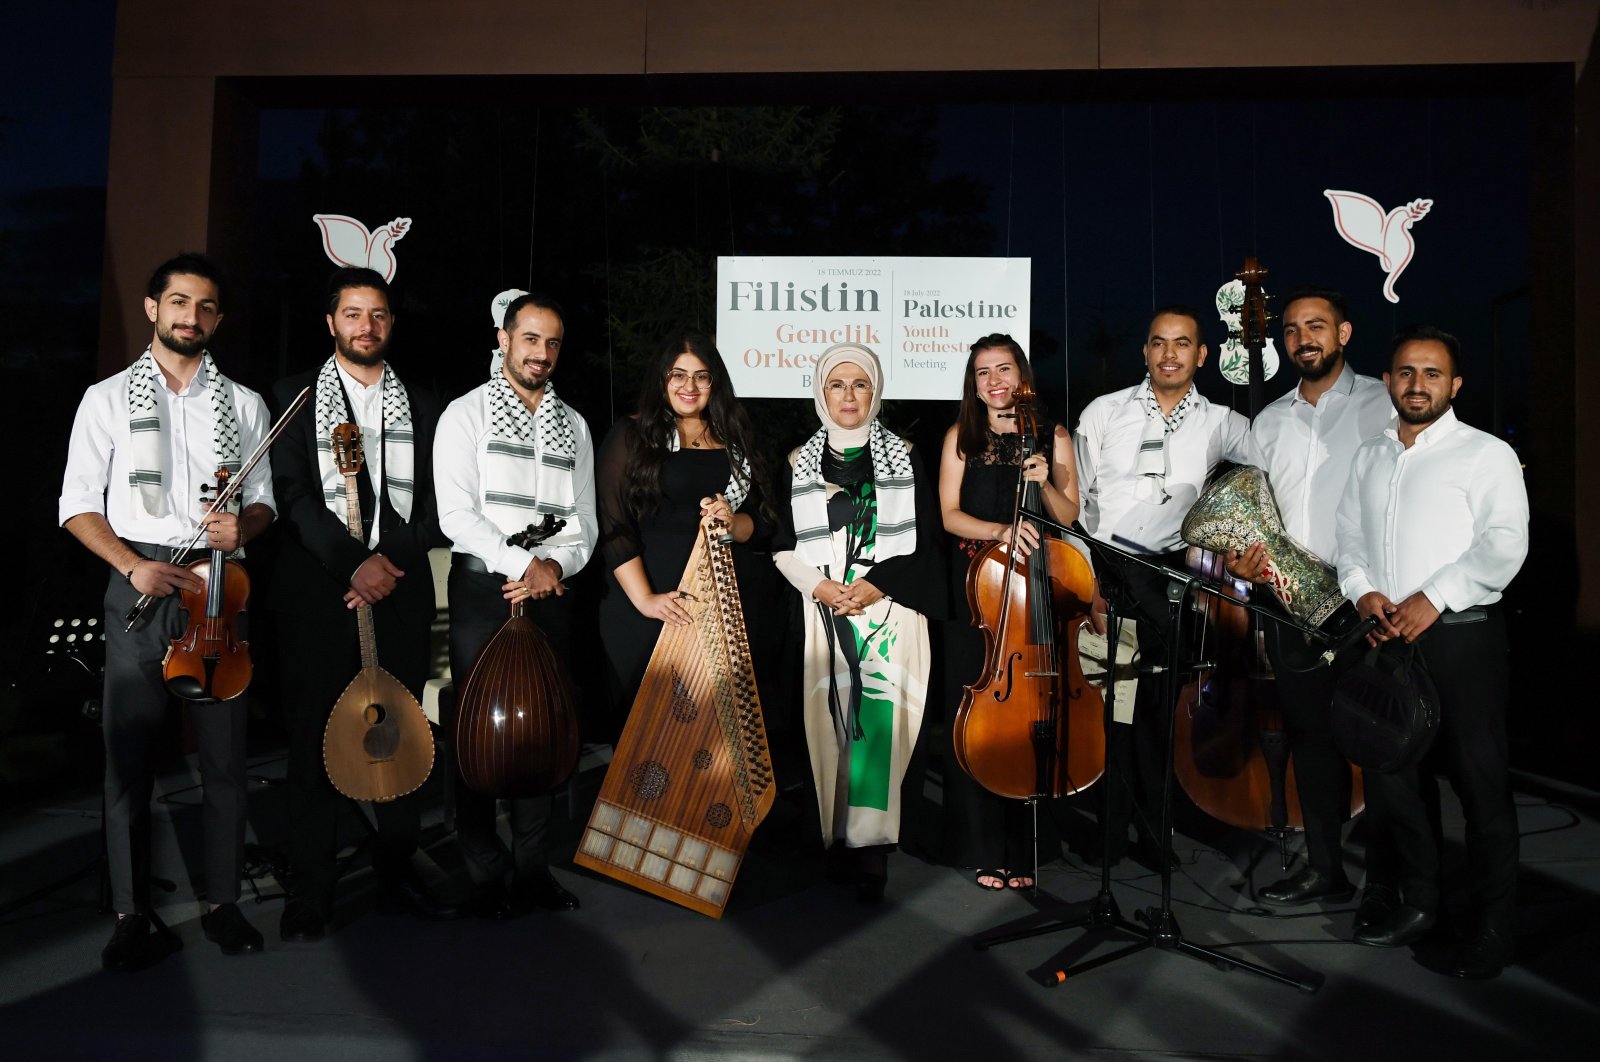 First lady Emine Erdoğan (C) poses with some members of the Palestinian Youth Orchestra, Presidential Complex, Ankara, Turkey, July 18, 2022. (AA)